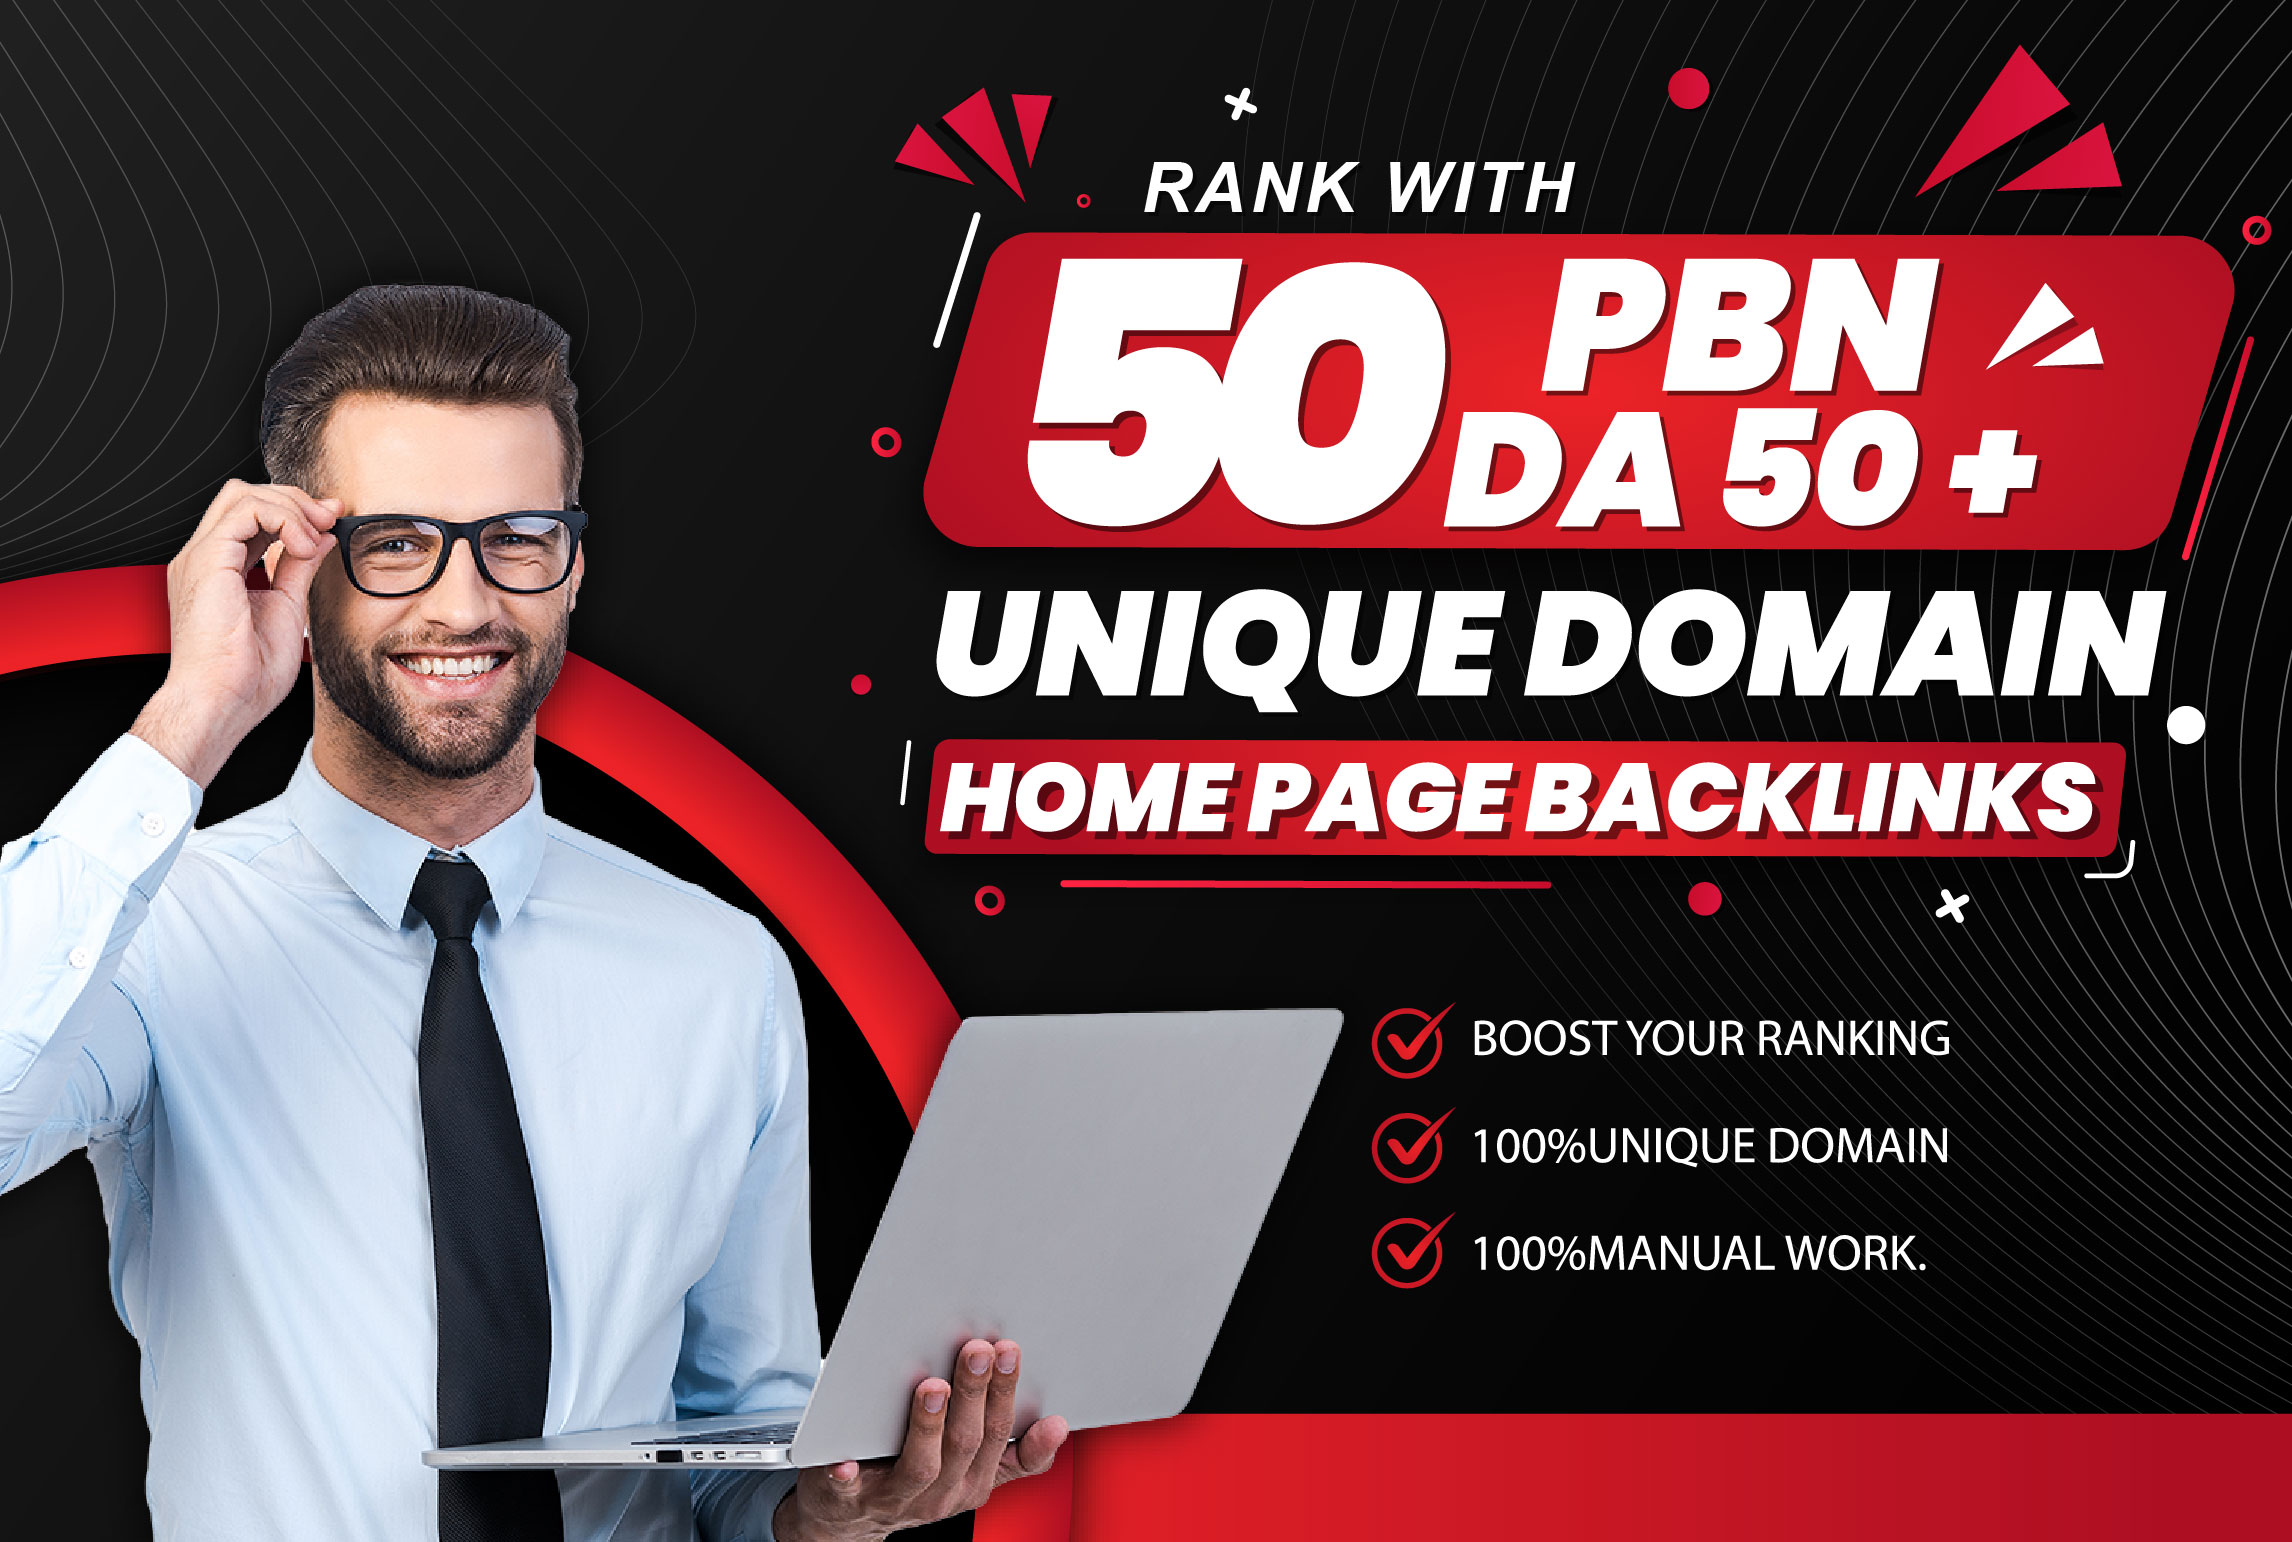 Build 50 Homepage permanent unique domains PBN backlinks on DA 50+ strong domains